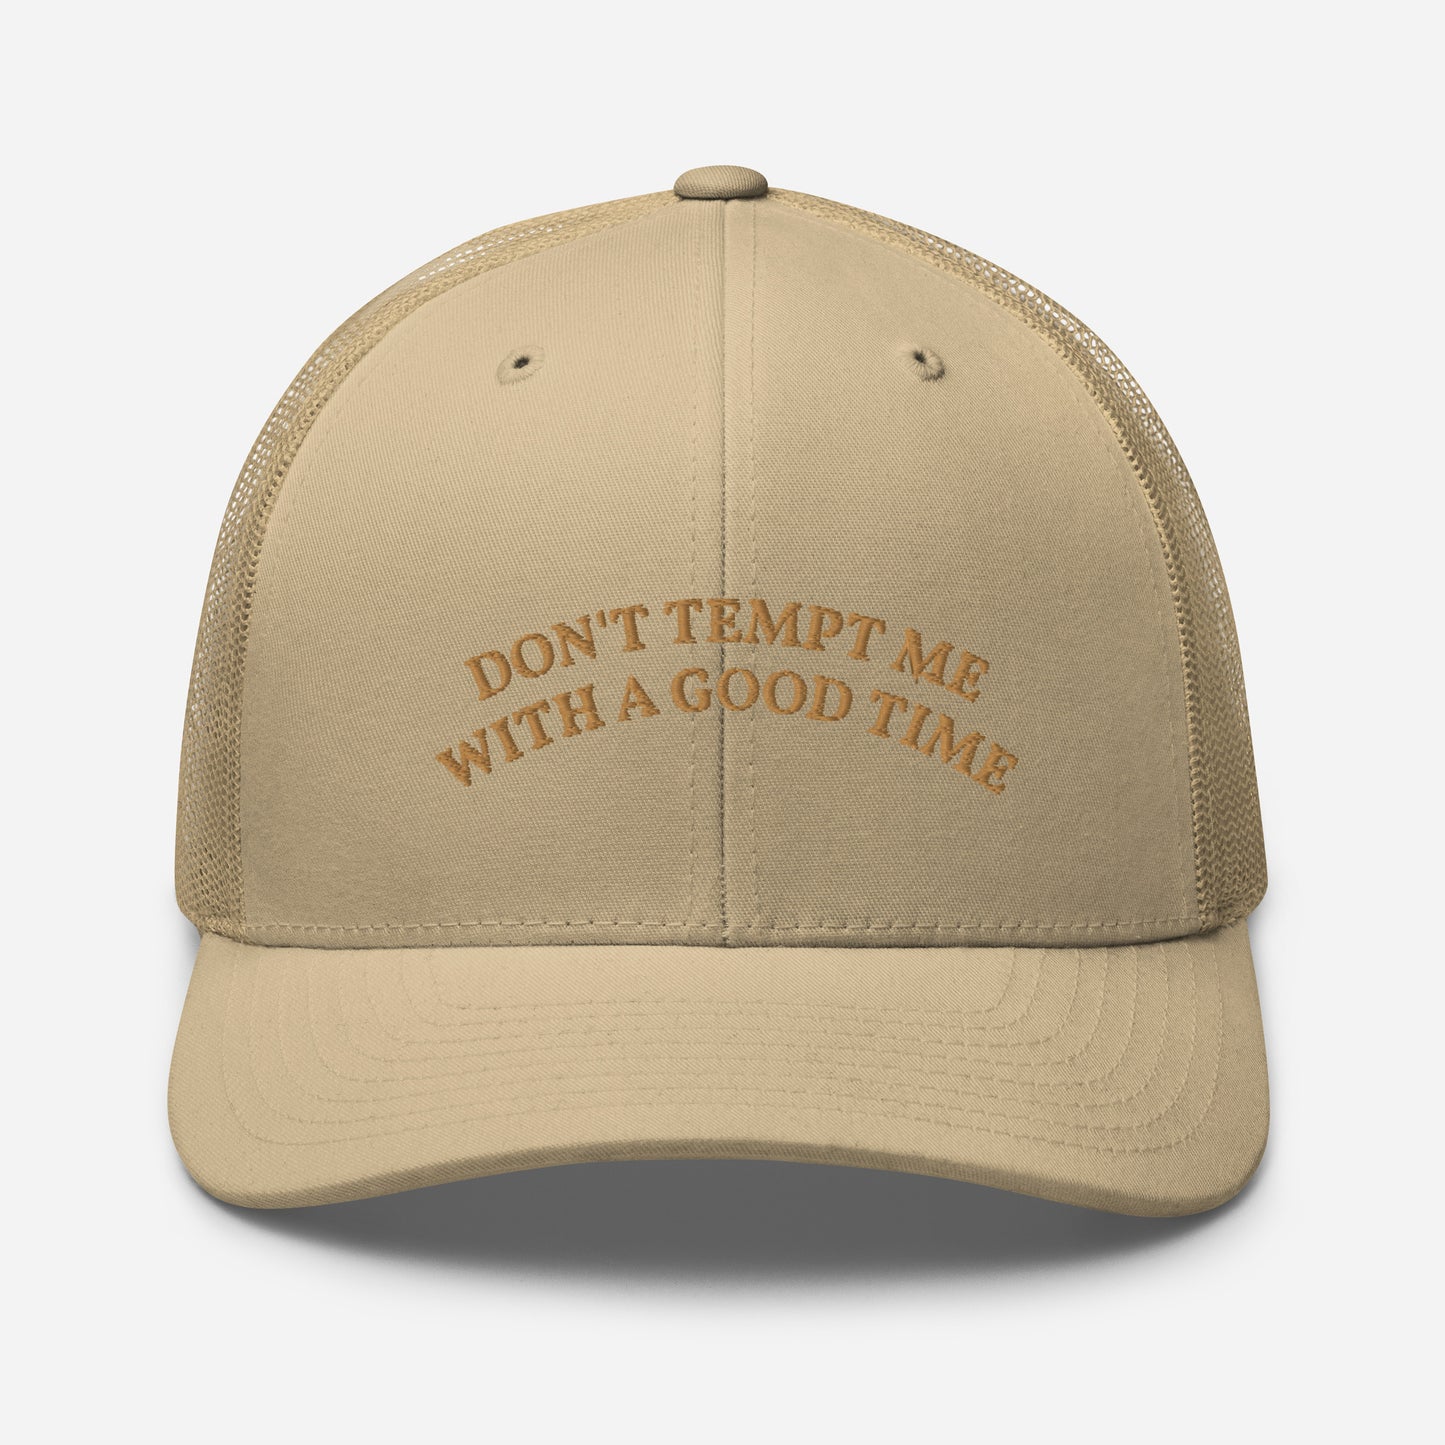 Don't Tempt Me With A Good Time | Retro Trucker Hat | Embroidered